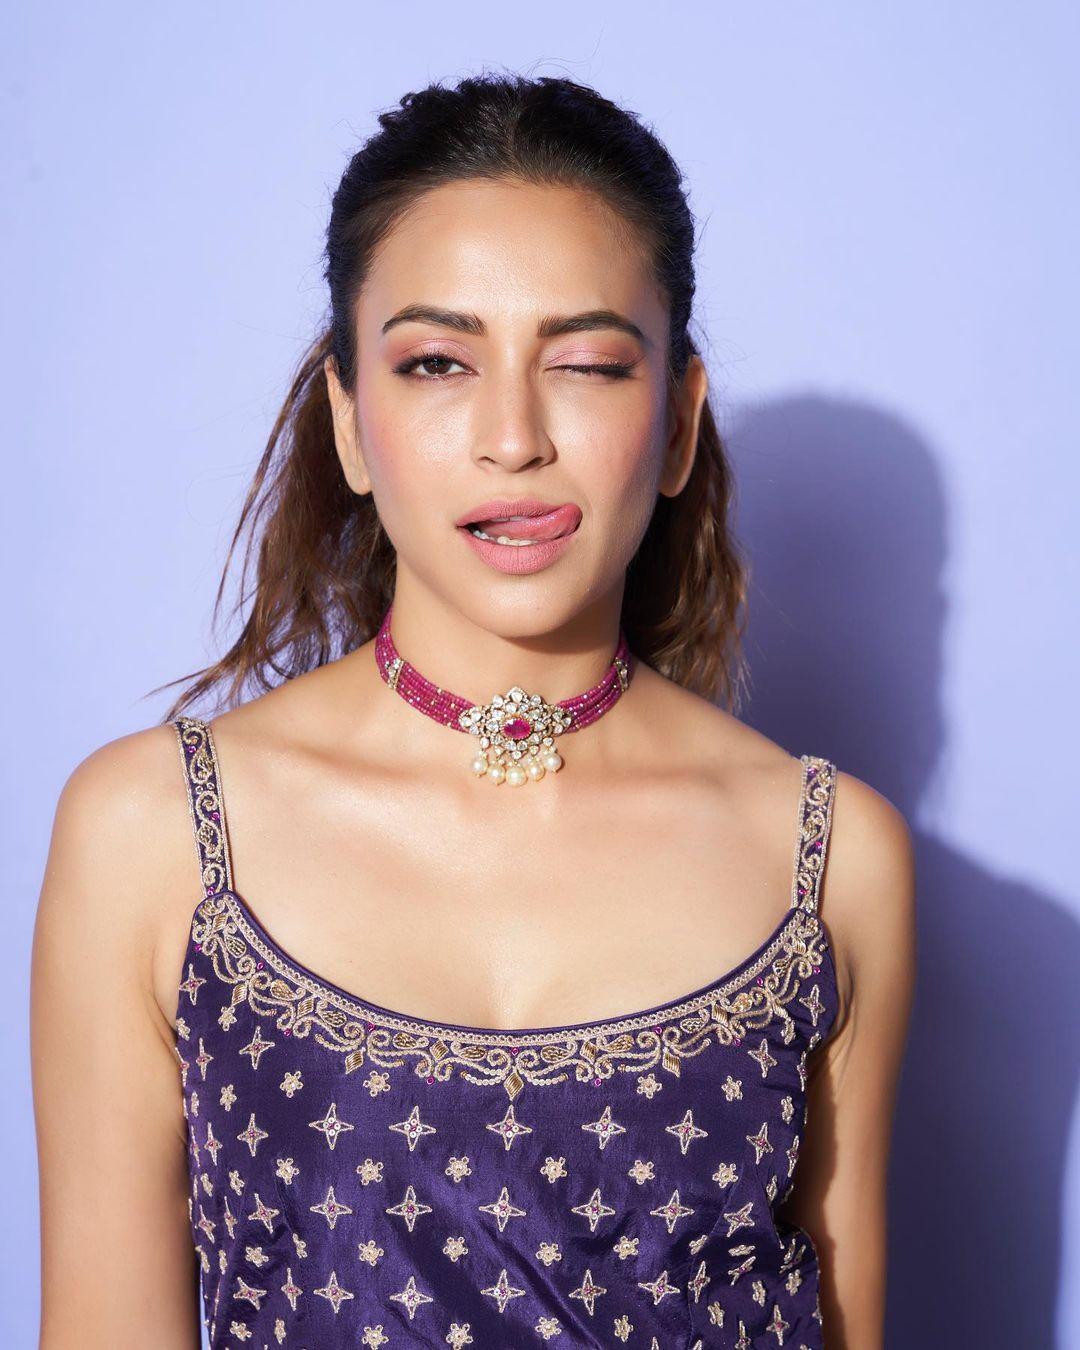 She finished her look with a matching dupatta, tied her hair in a puffed ponytail, and adorned a contrasting pink choker. This look is a perfect fit to ace your appearance in a minimalistic way